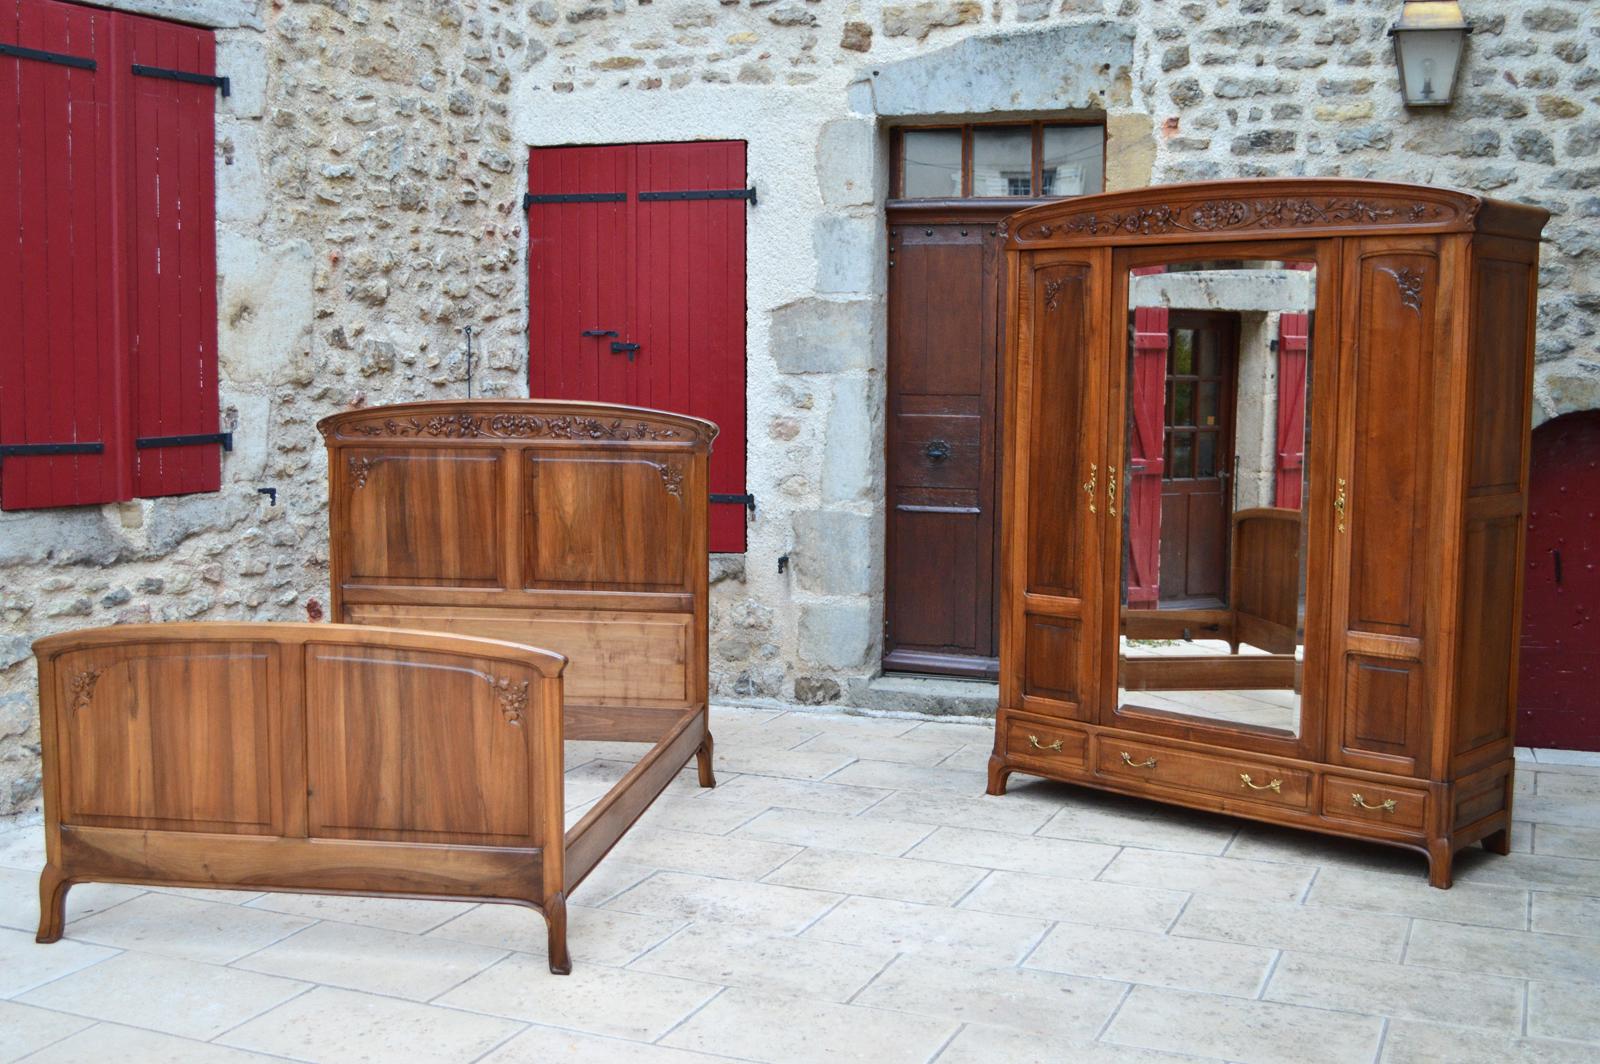 Superb set composed of two elements: one large wardrobe, one bed.

French Art Nouveau, Ecole de Nancy, circa 1905.
Manufacturer to identify. Most certainly Louis Majorelle or Edouard Diot.

Beautiful quality of manufacture, the two pieces of